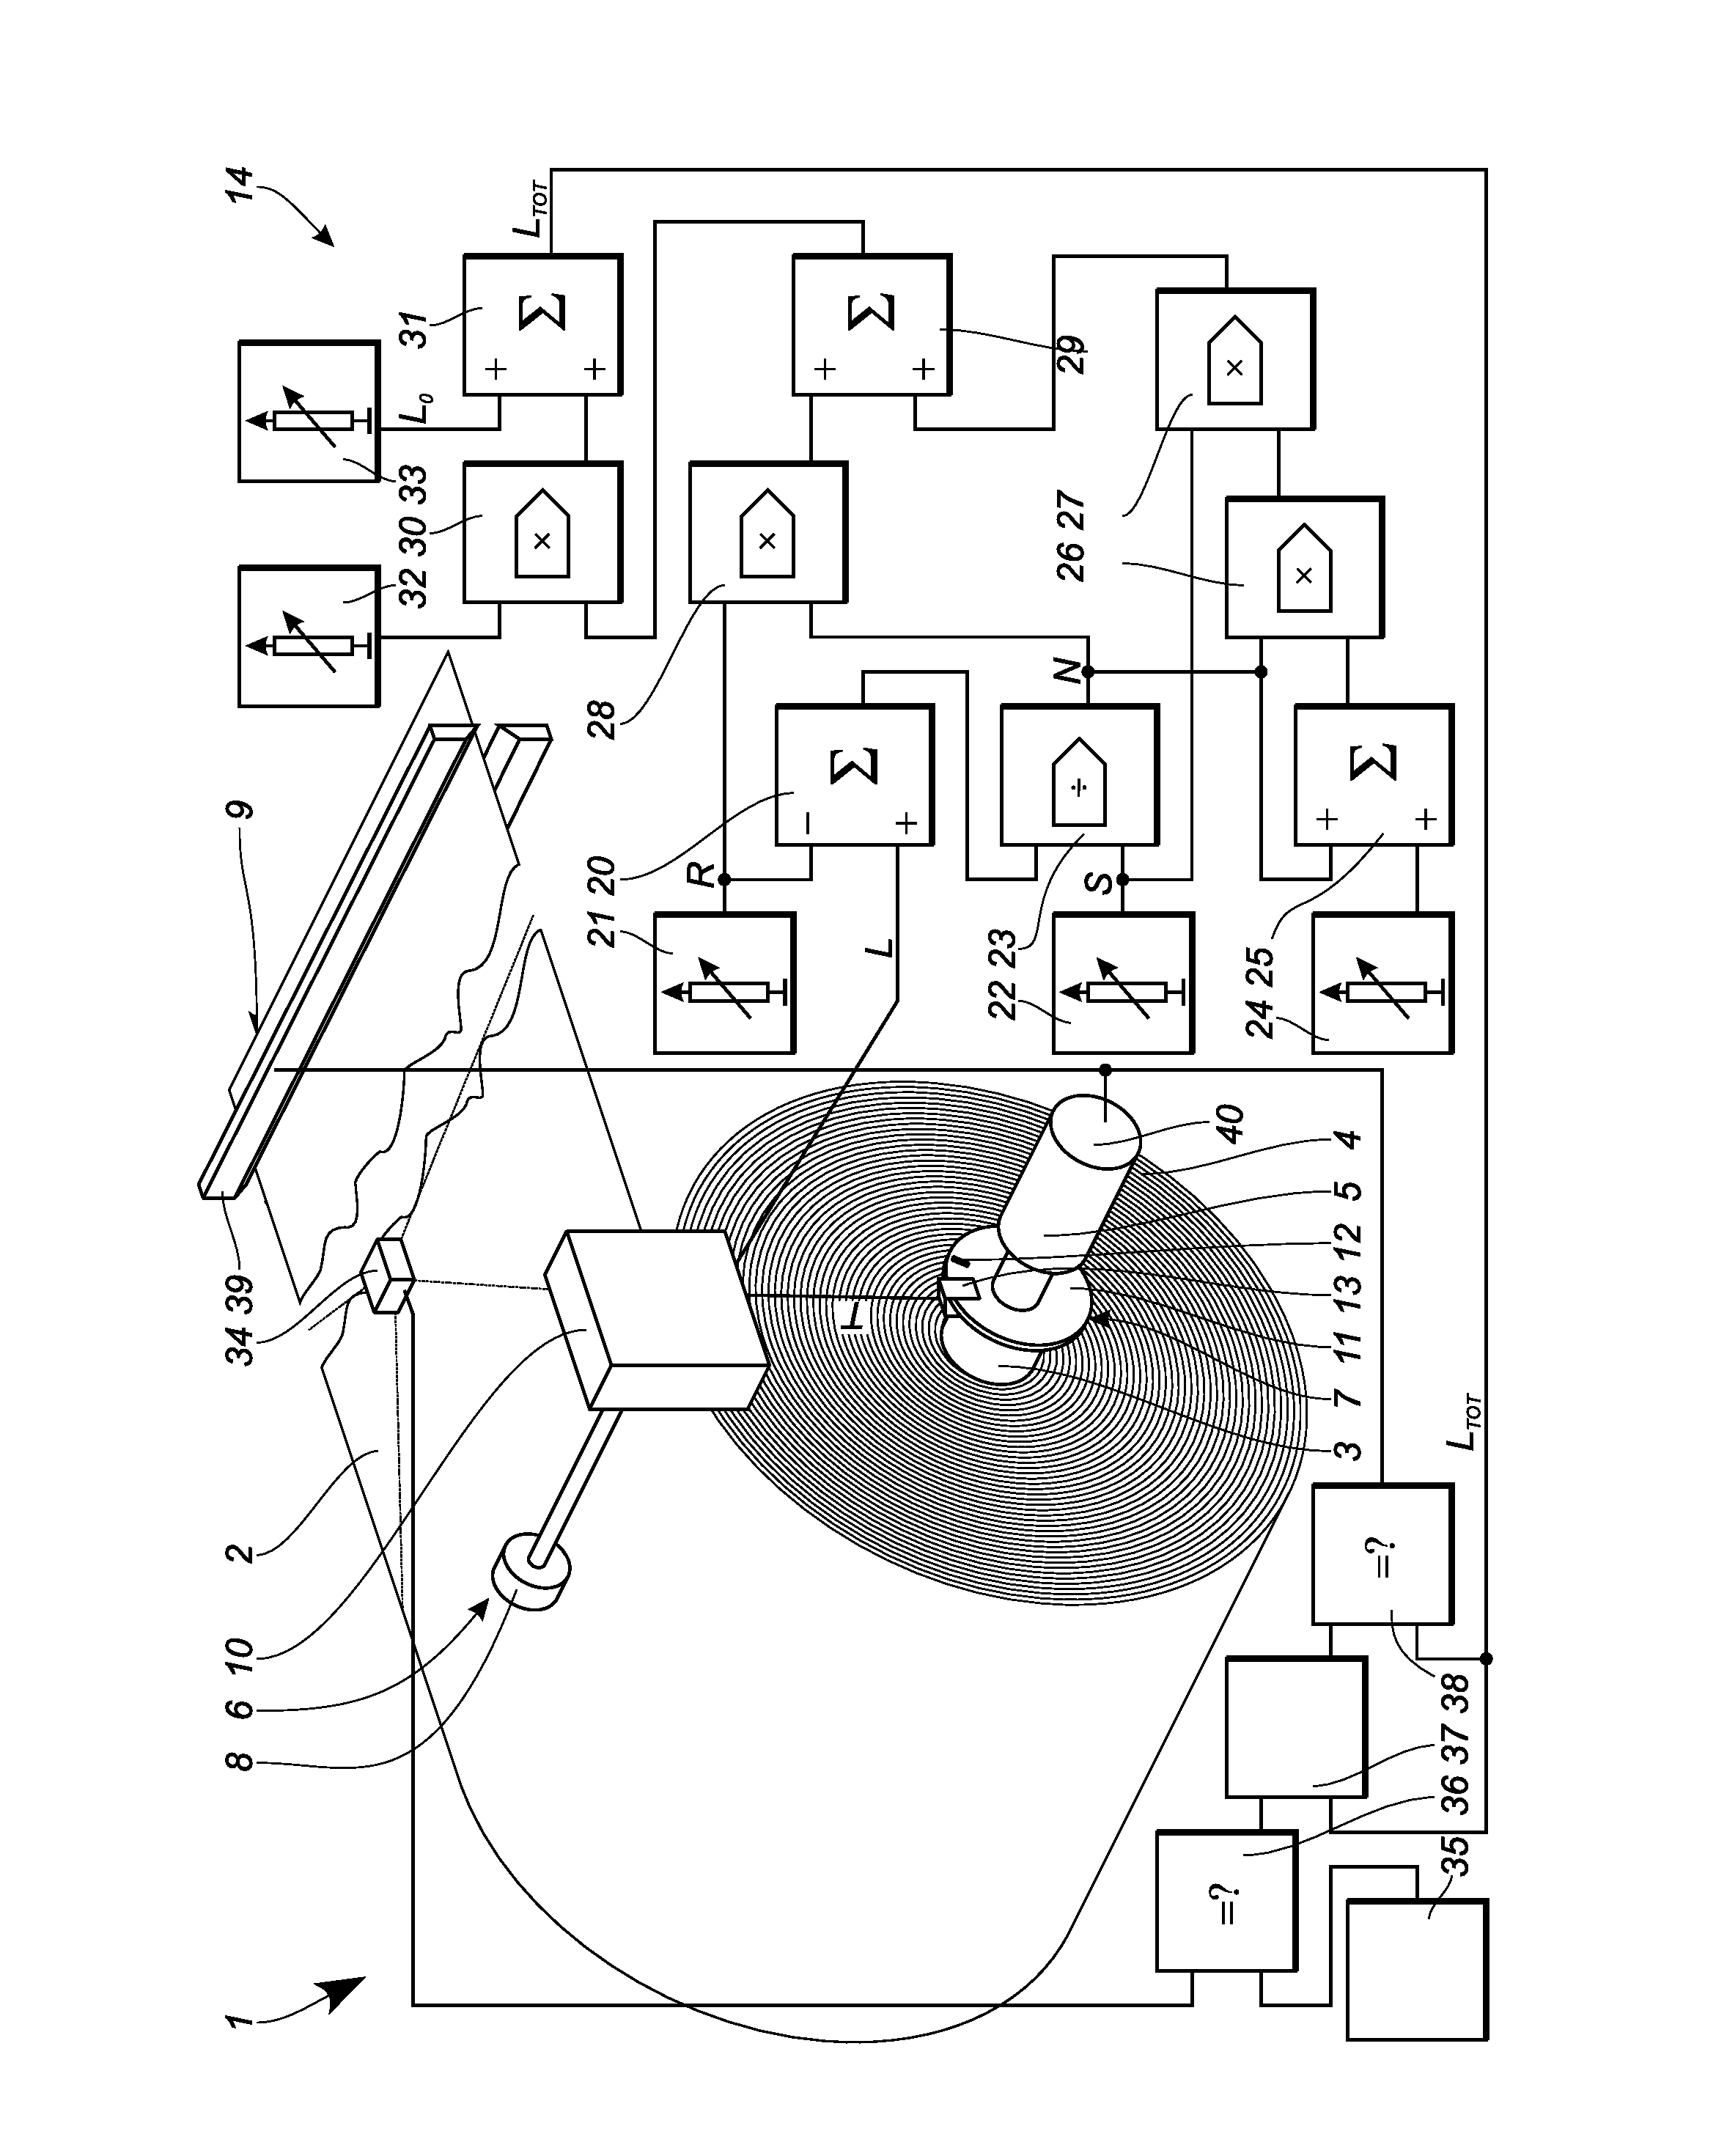 Method and device for inspecting and tailoring a moving product web